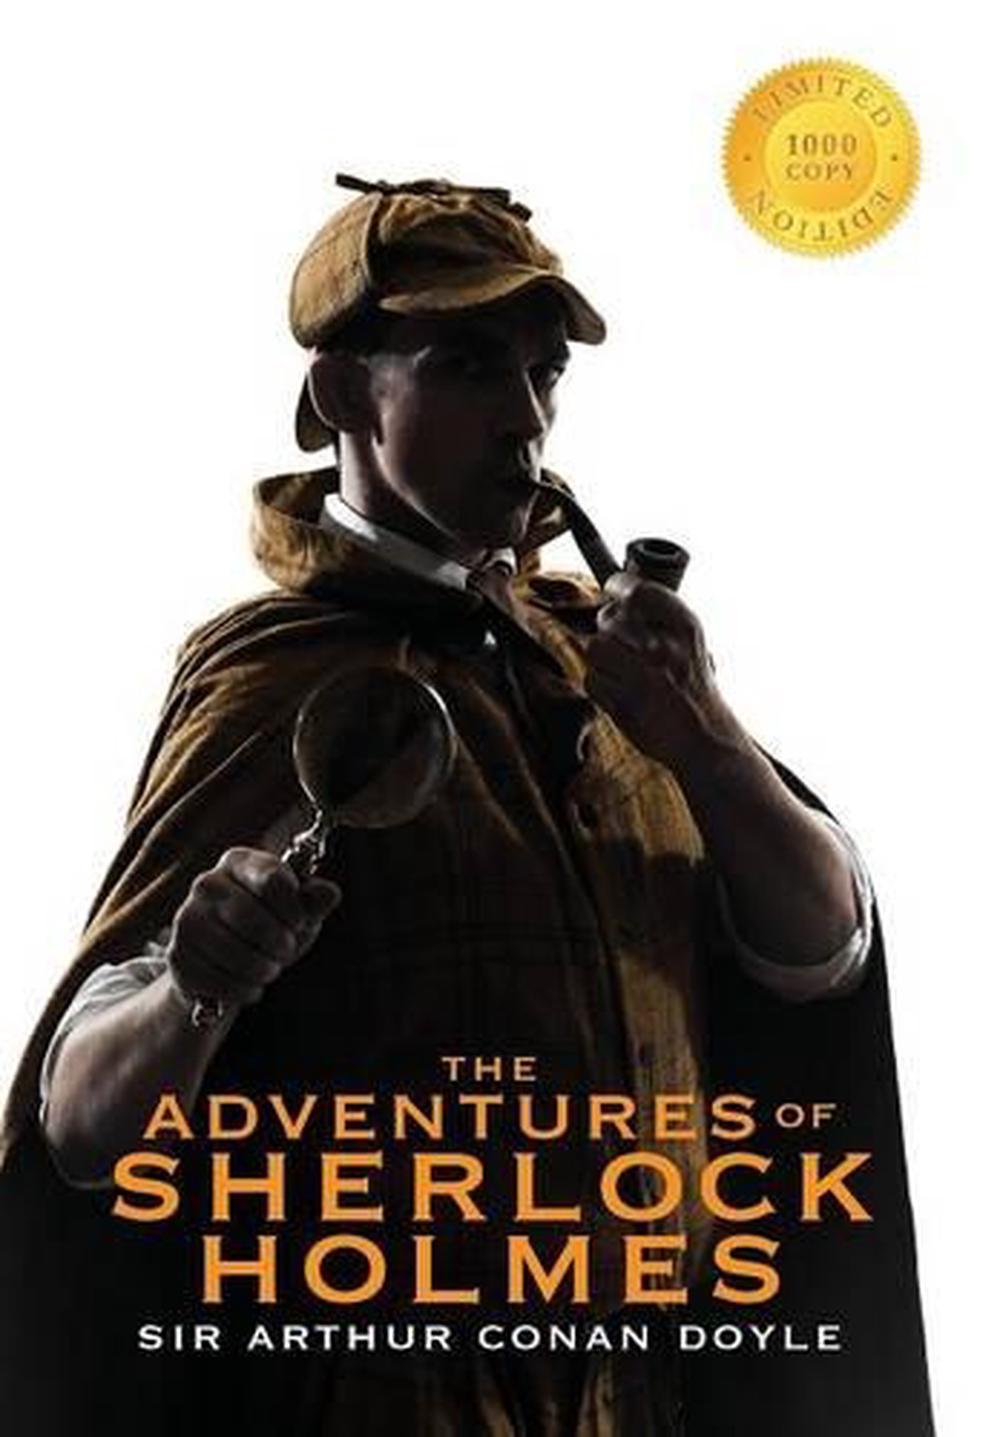 book review of the adventures of sherlock holmes